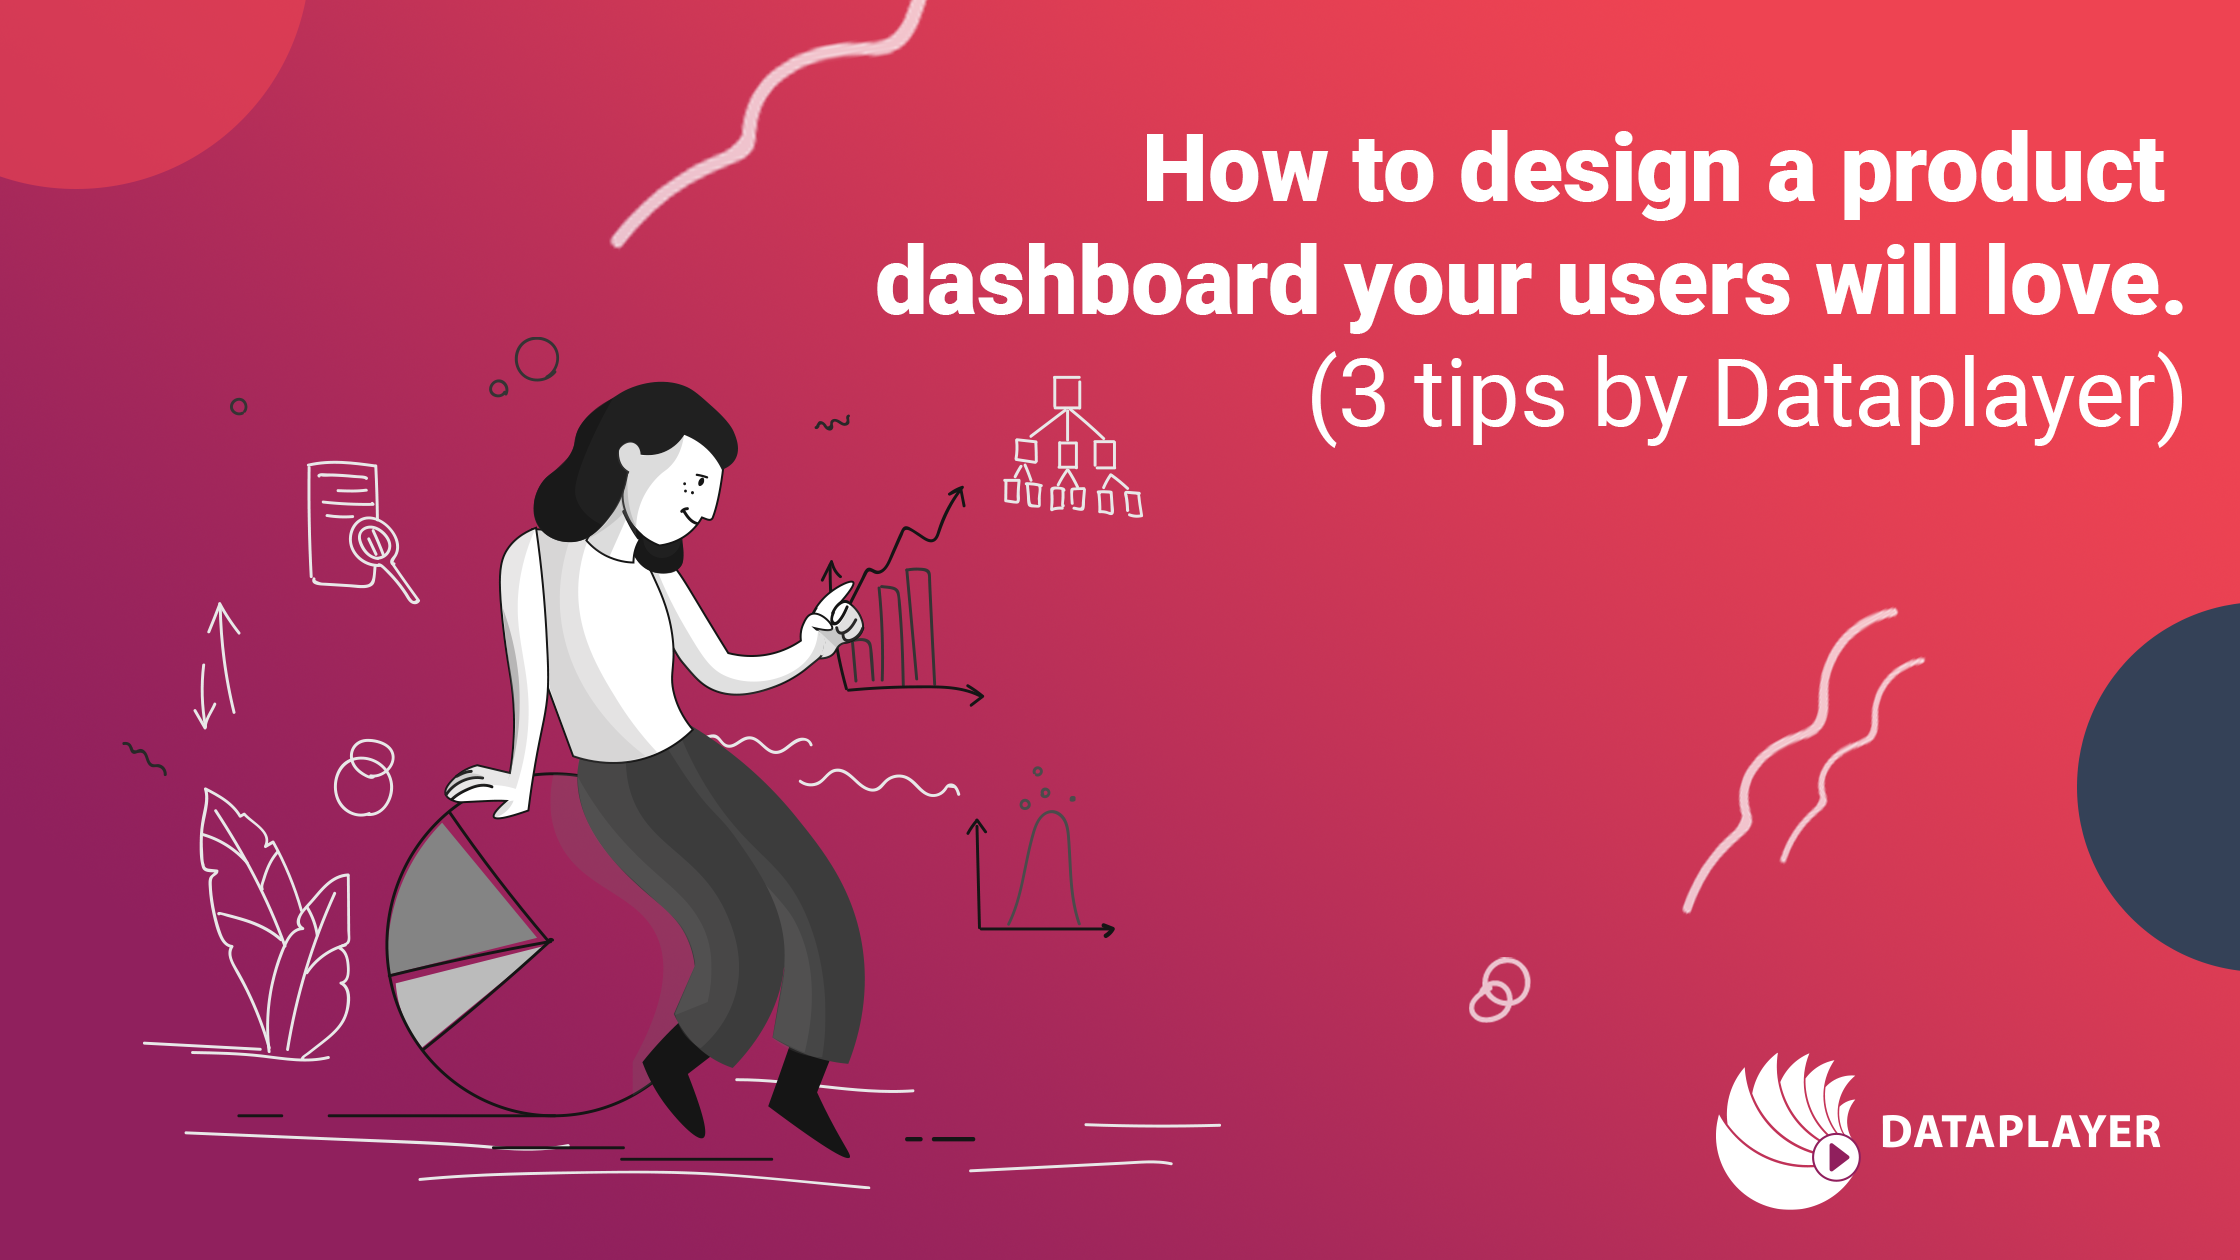 How to design a product dashboard your users will love.  (3 tips by Dataplayer).